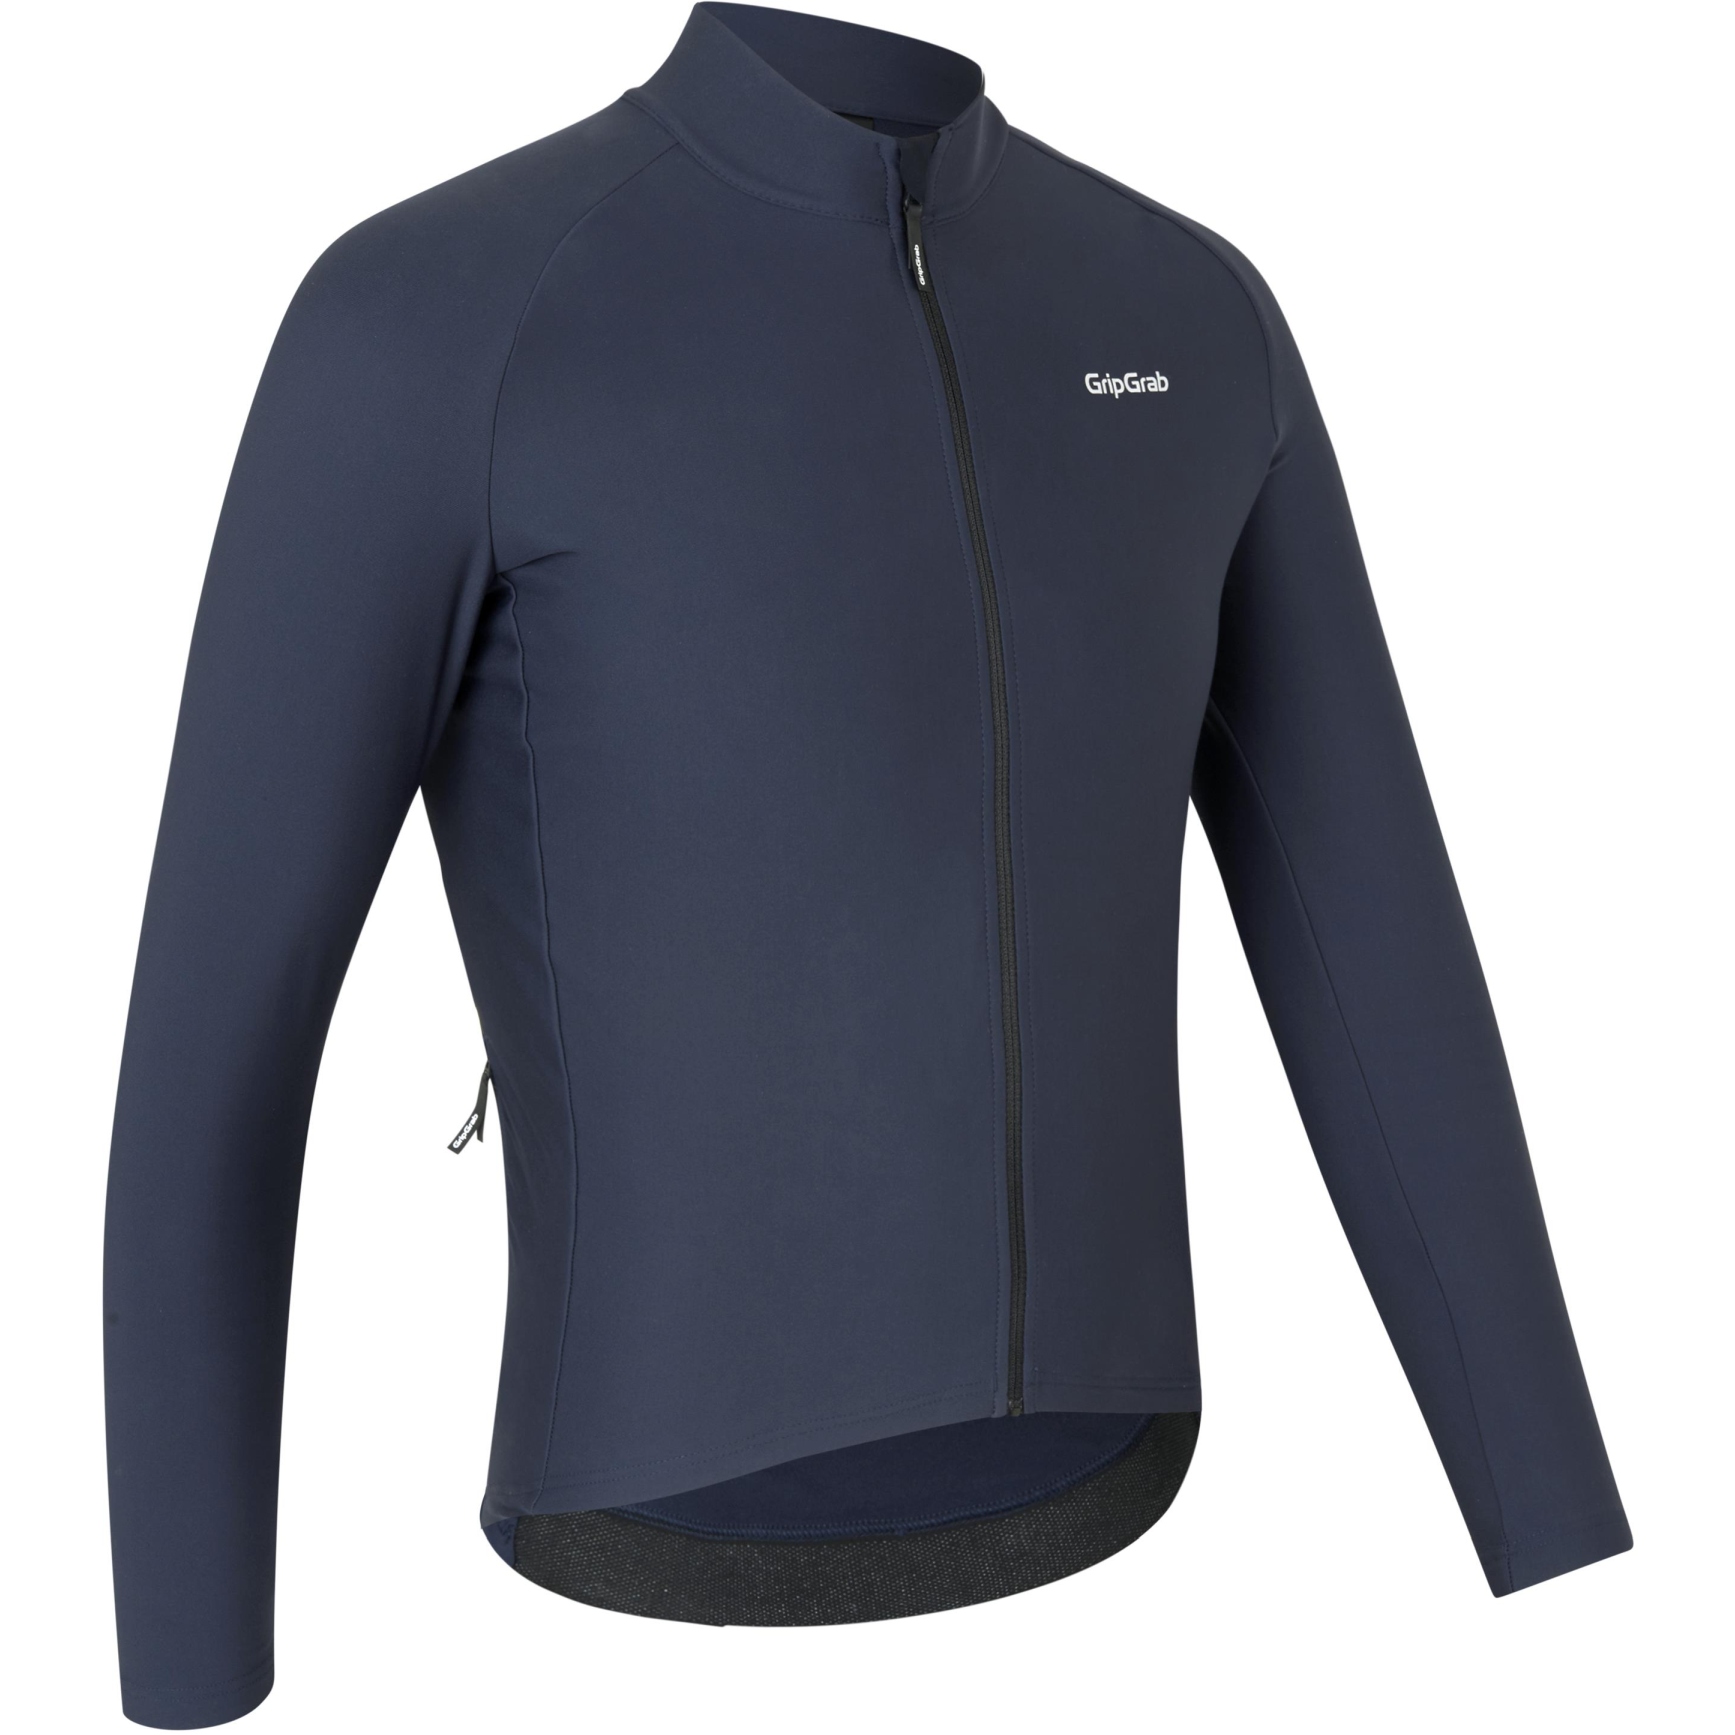 Picture of GripGrab ThermaPace Thermal Long Sleeve Jersey Men - navy blue